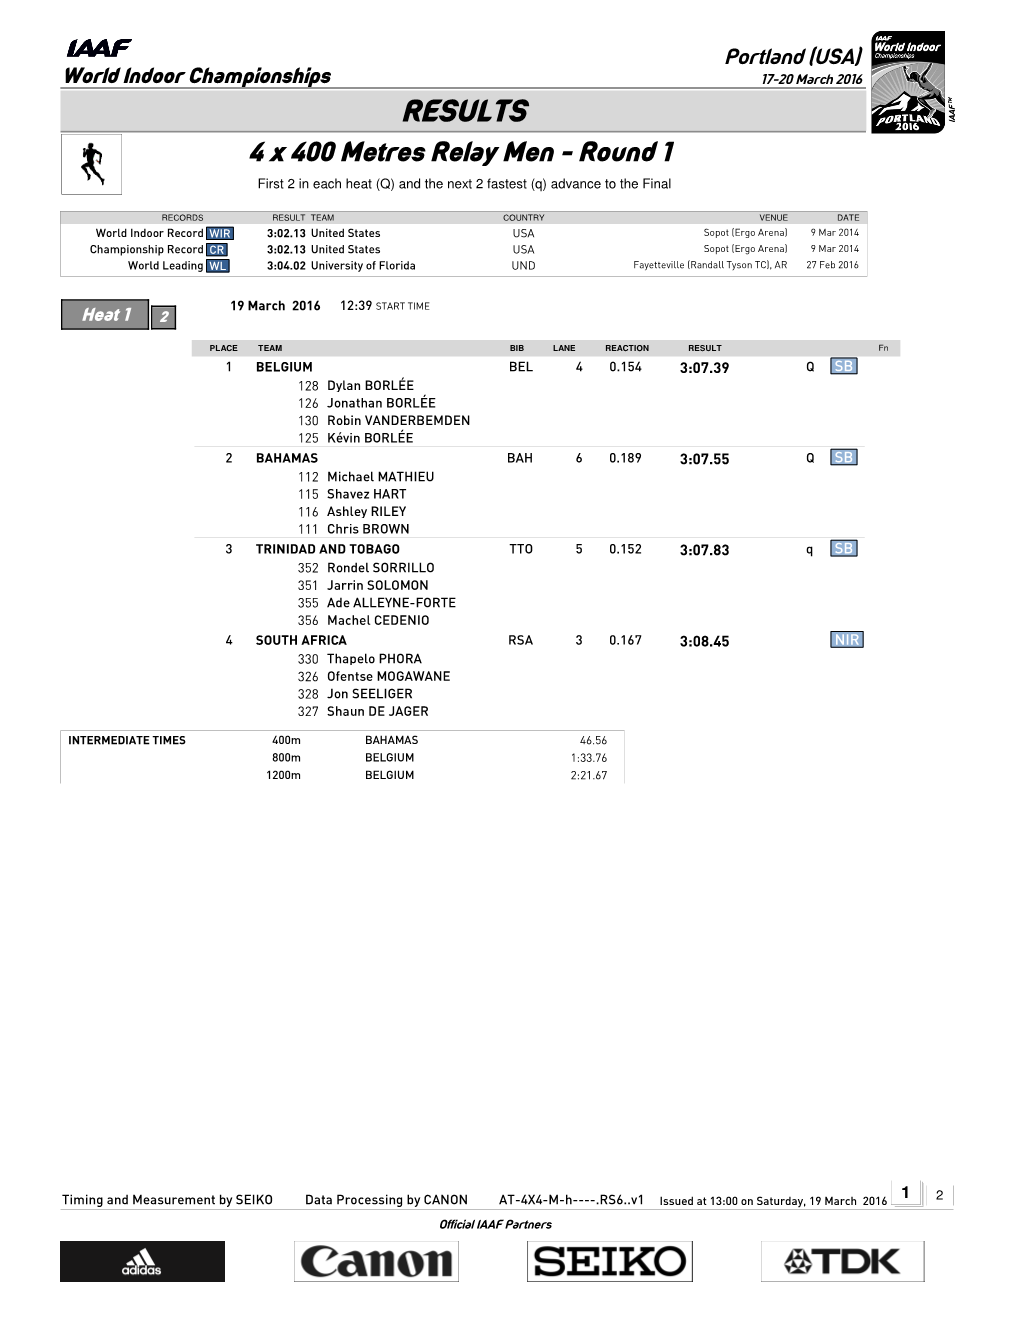 RESULTS 4 X 400 Metres Relay Men - Round 1 First 2 in Each Heat (Q) and the Next 2 Fastest (Q) Advance to the Final